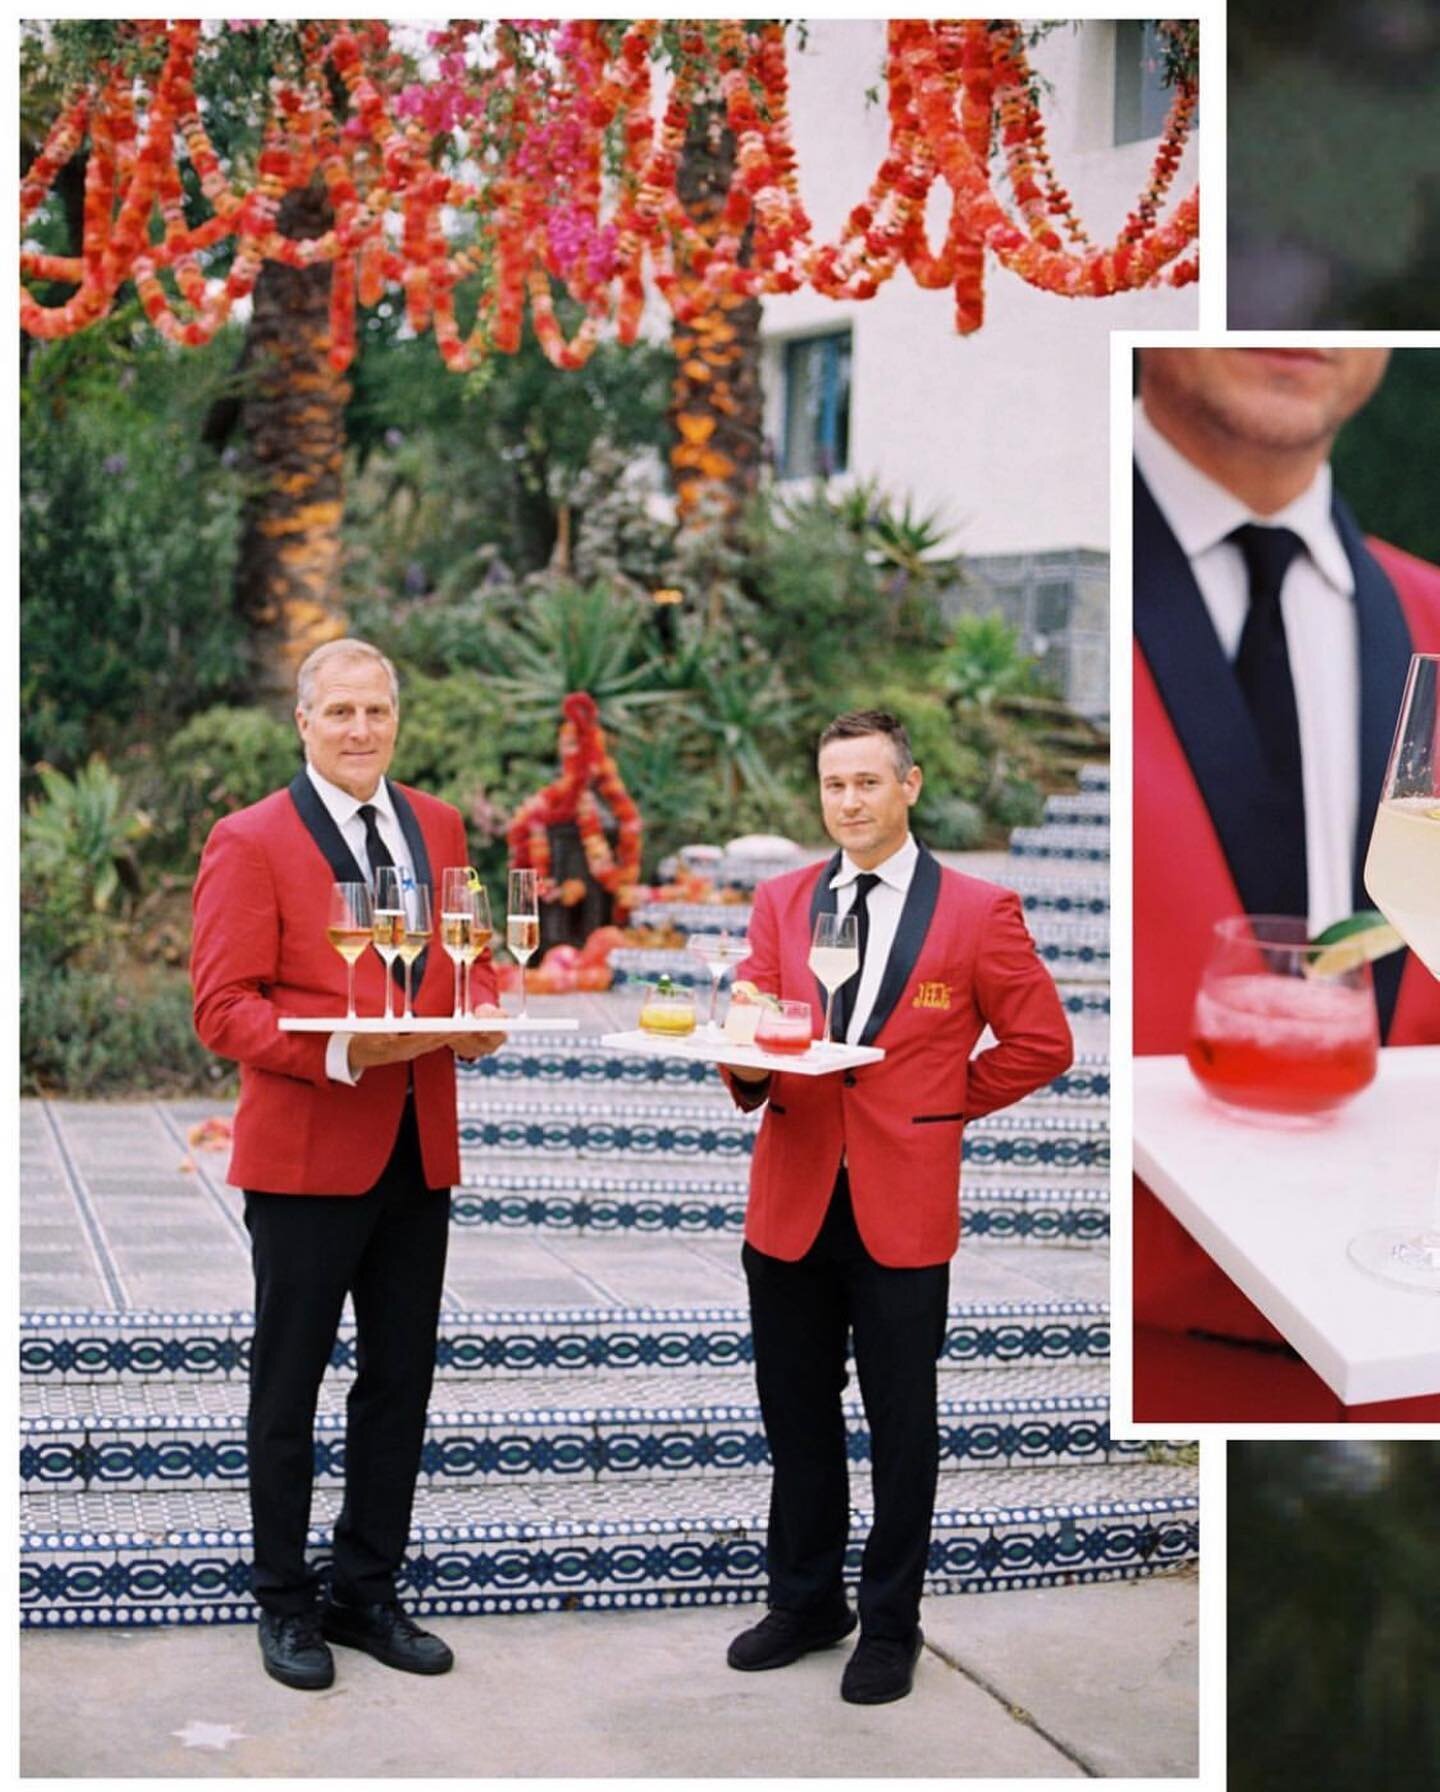 Gleefully reposting this series from @jilldoesweddings 
💕 Coolest Bride &amp; Groom We Could Dream Up 
&diams;️ Monogrammed Red Dinner Jackets
🌴 Monkey, Flamingo, and Palm Cocktail Picks
👙 Vintage Technicolor Power Suits for LE TEAM
⛲️ Custom Gard